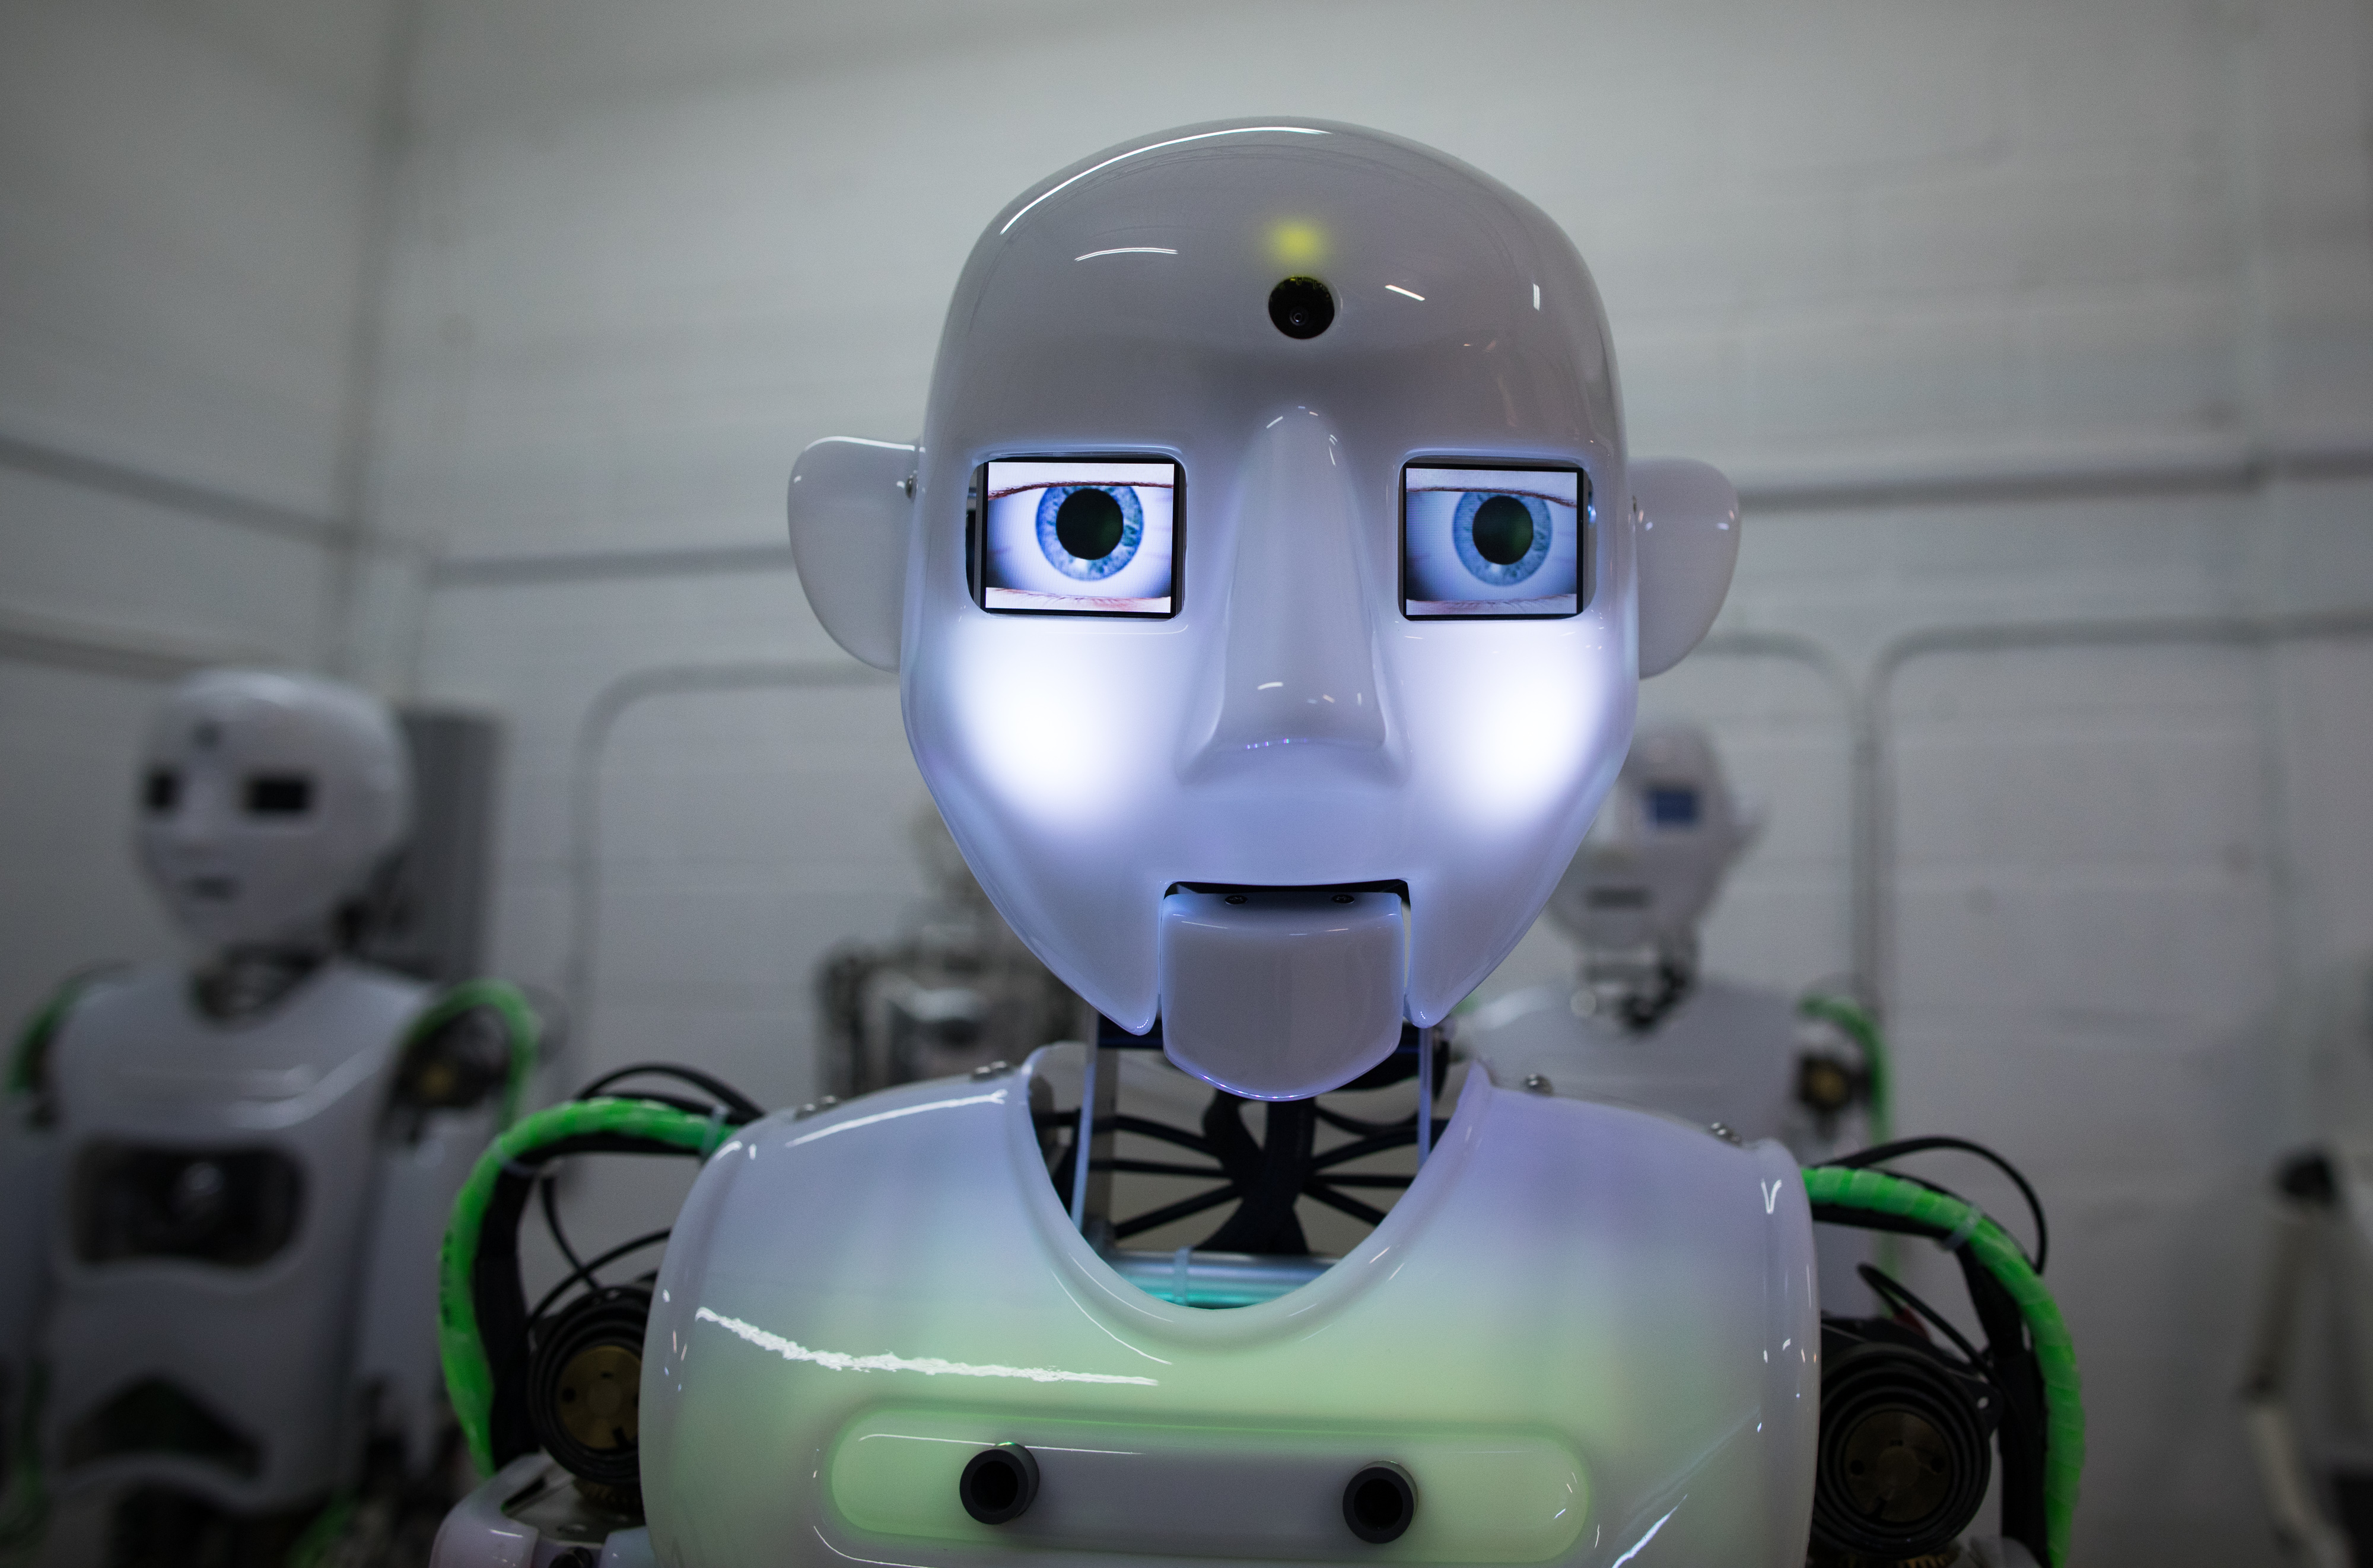 Gender-neutral robot priests could take over the Catholic church